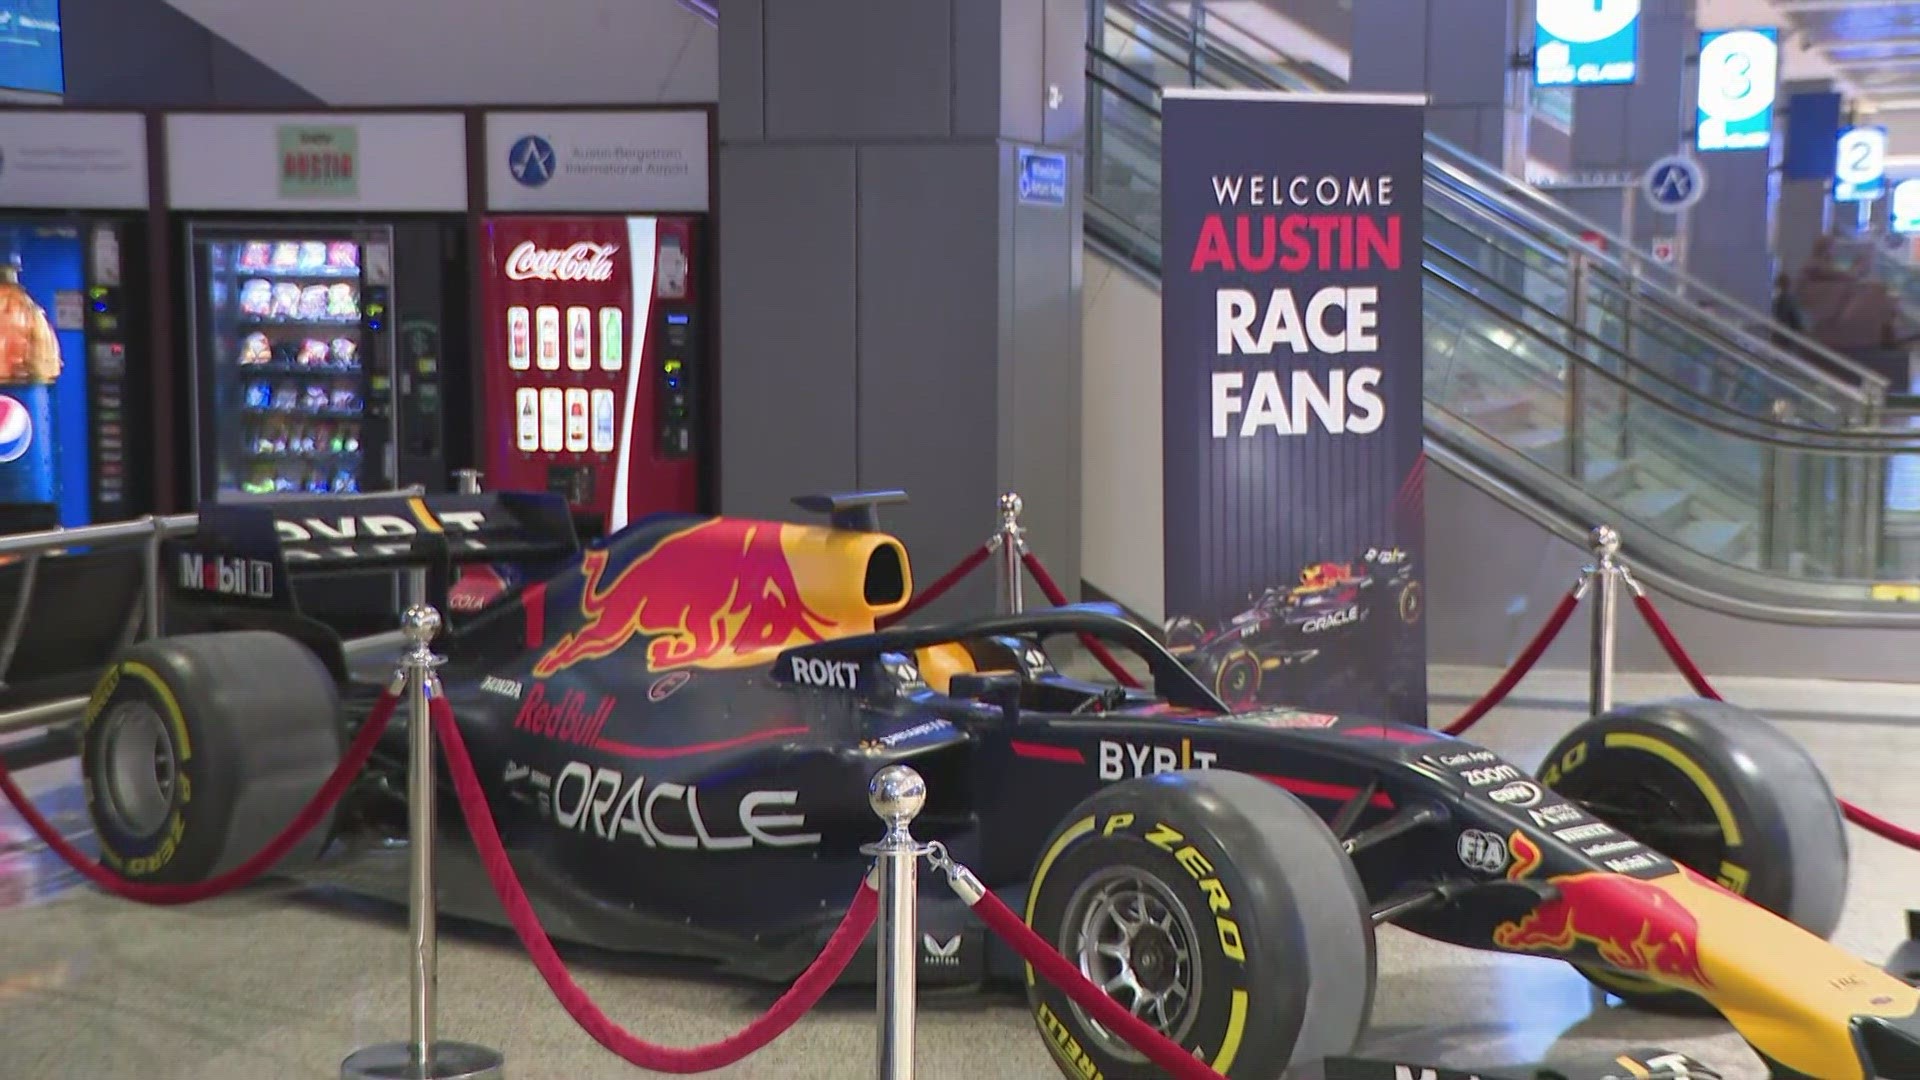 Over the next three days, hundreds of thousands of people will land in Austin for the F1 US Grand Prix.